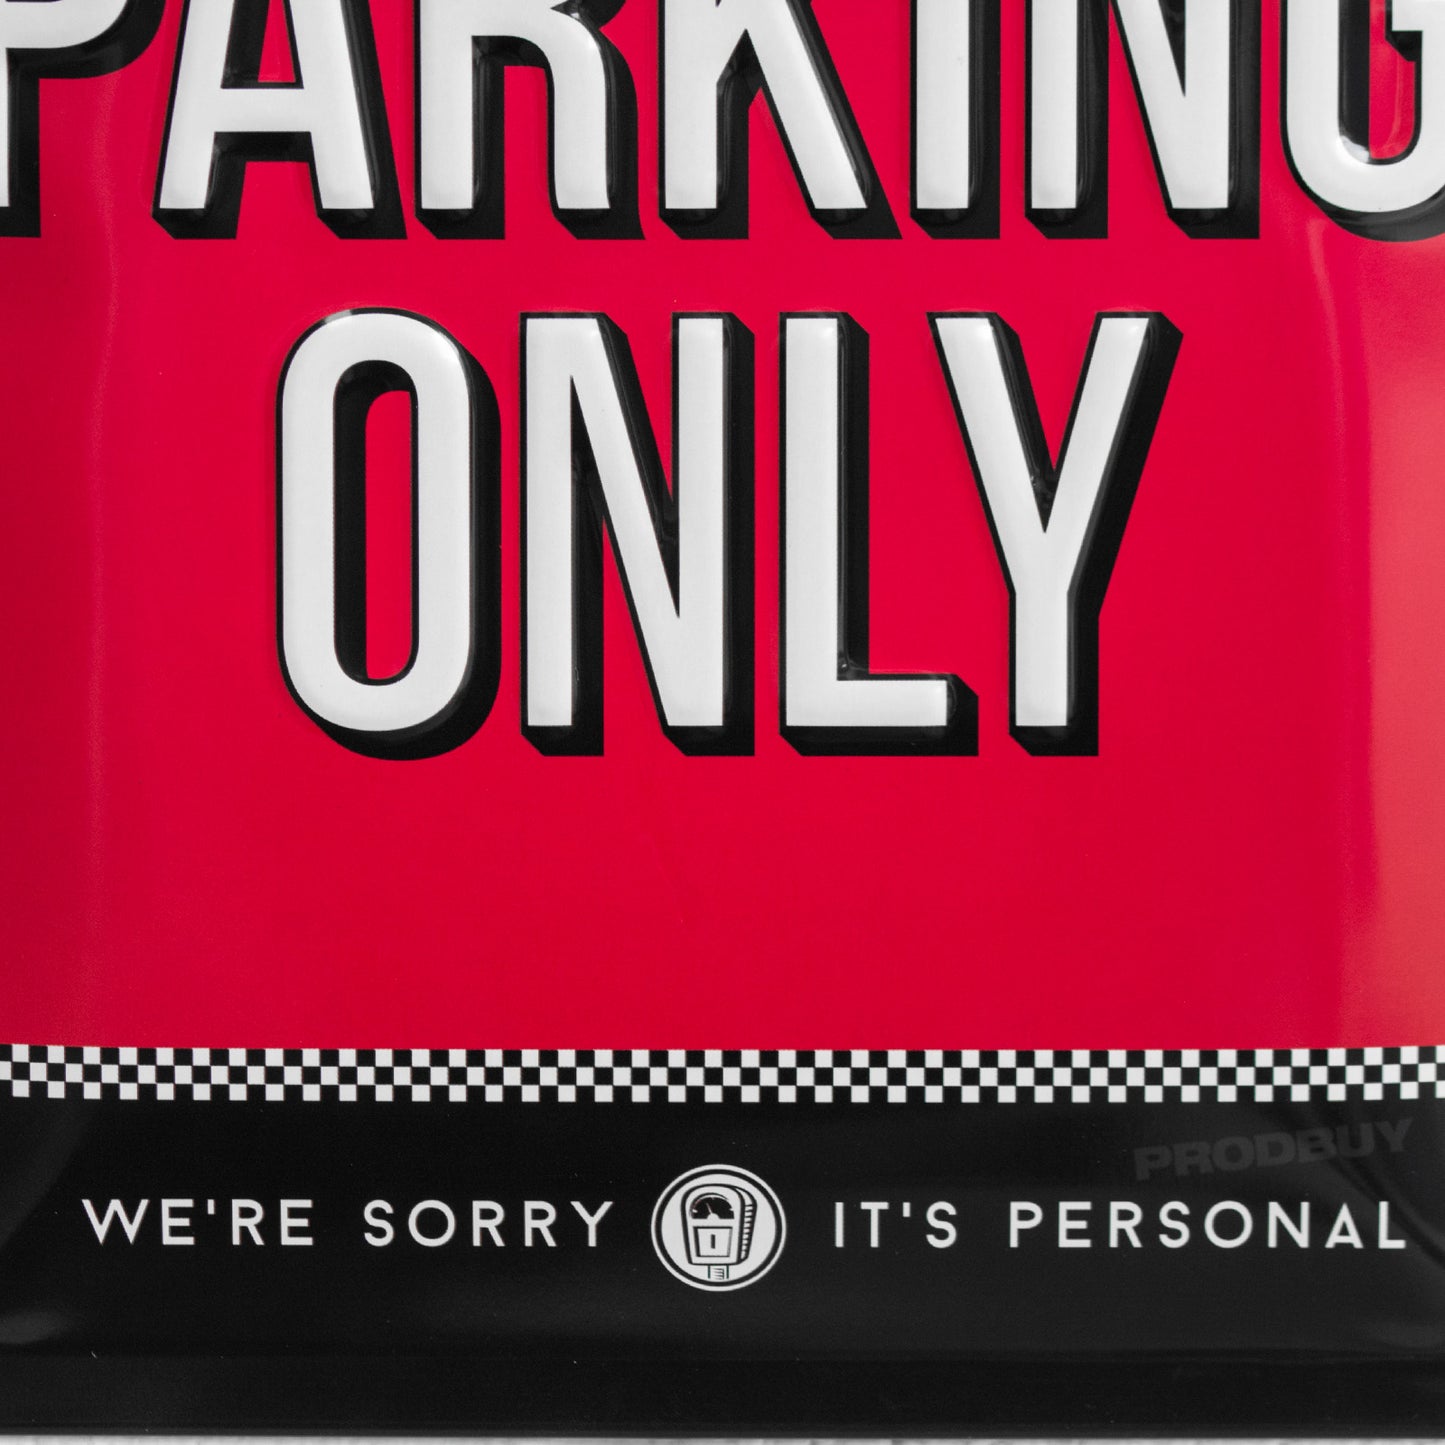 Mini Parking Only 30cm Metal Wall Sign